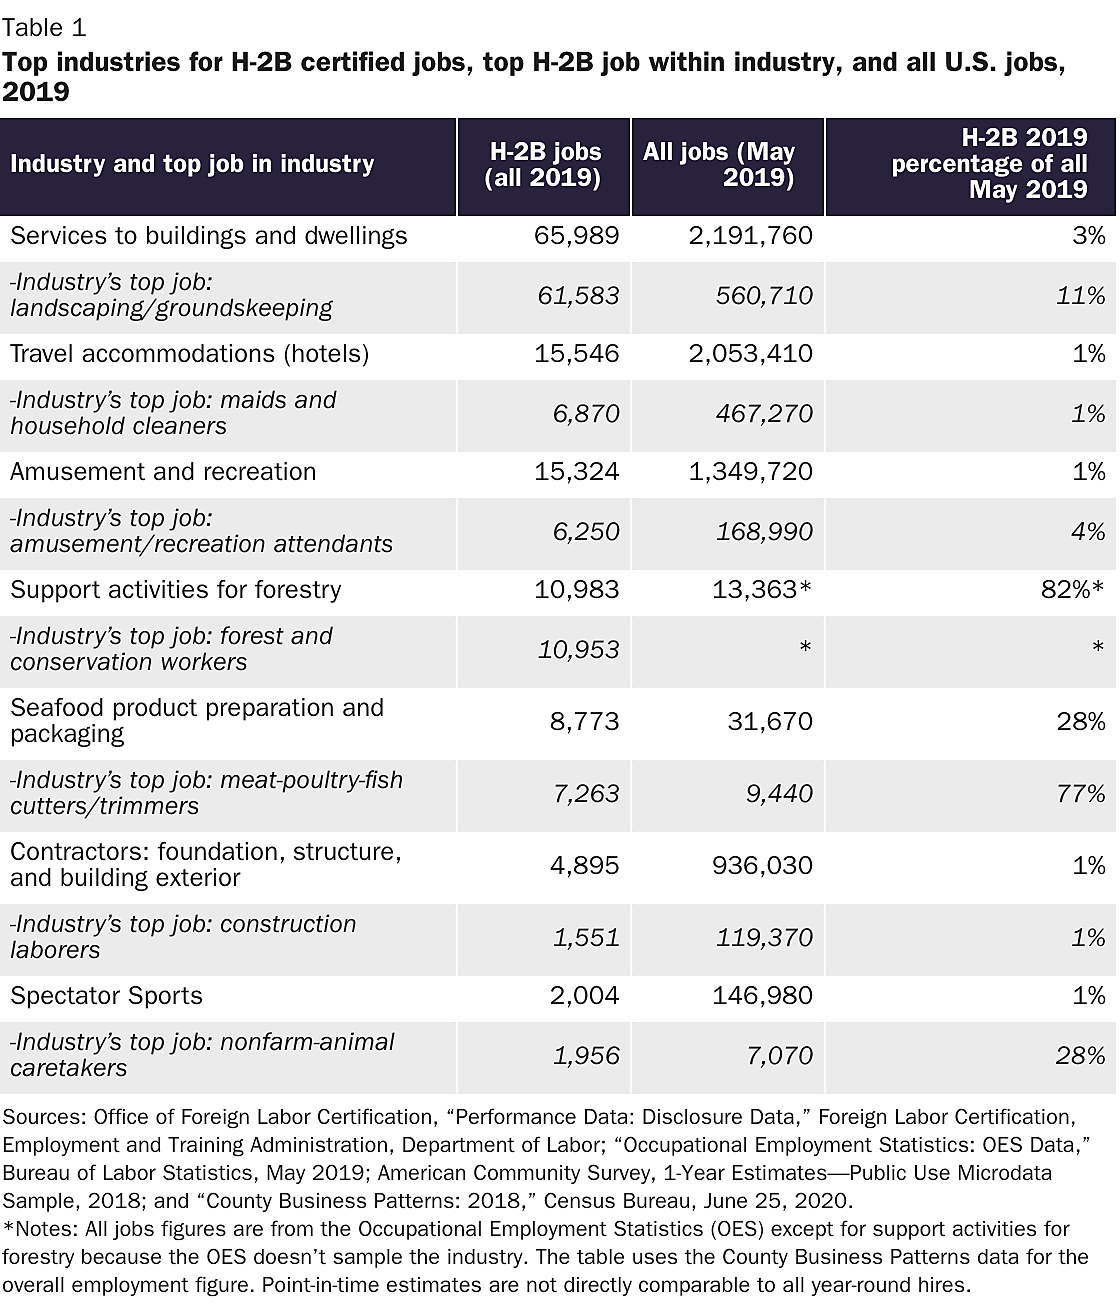 Table 1 Top-industries-for-h-2b-certified-jobs-top-h-2b-job-within-industry-and-all-us-jobs.png